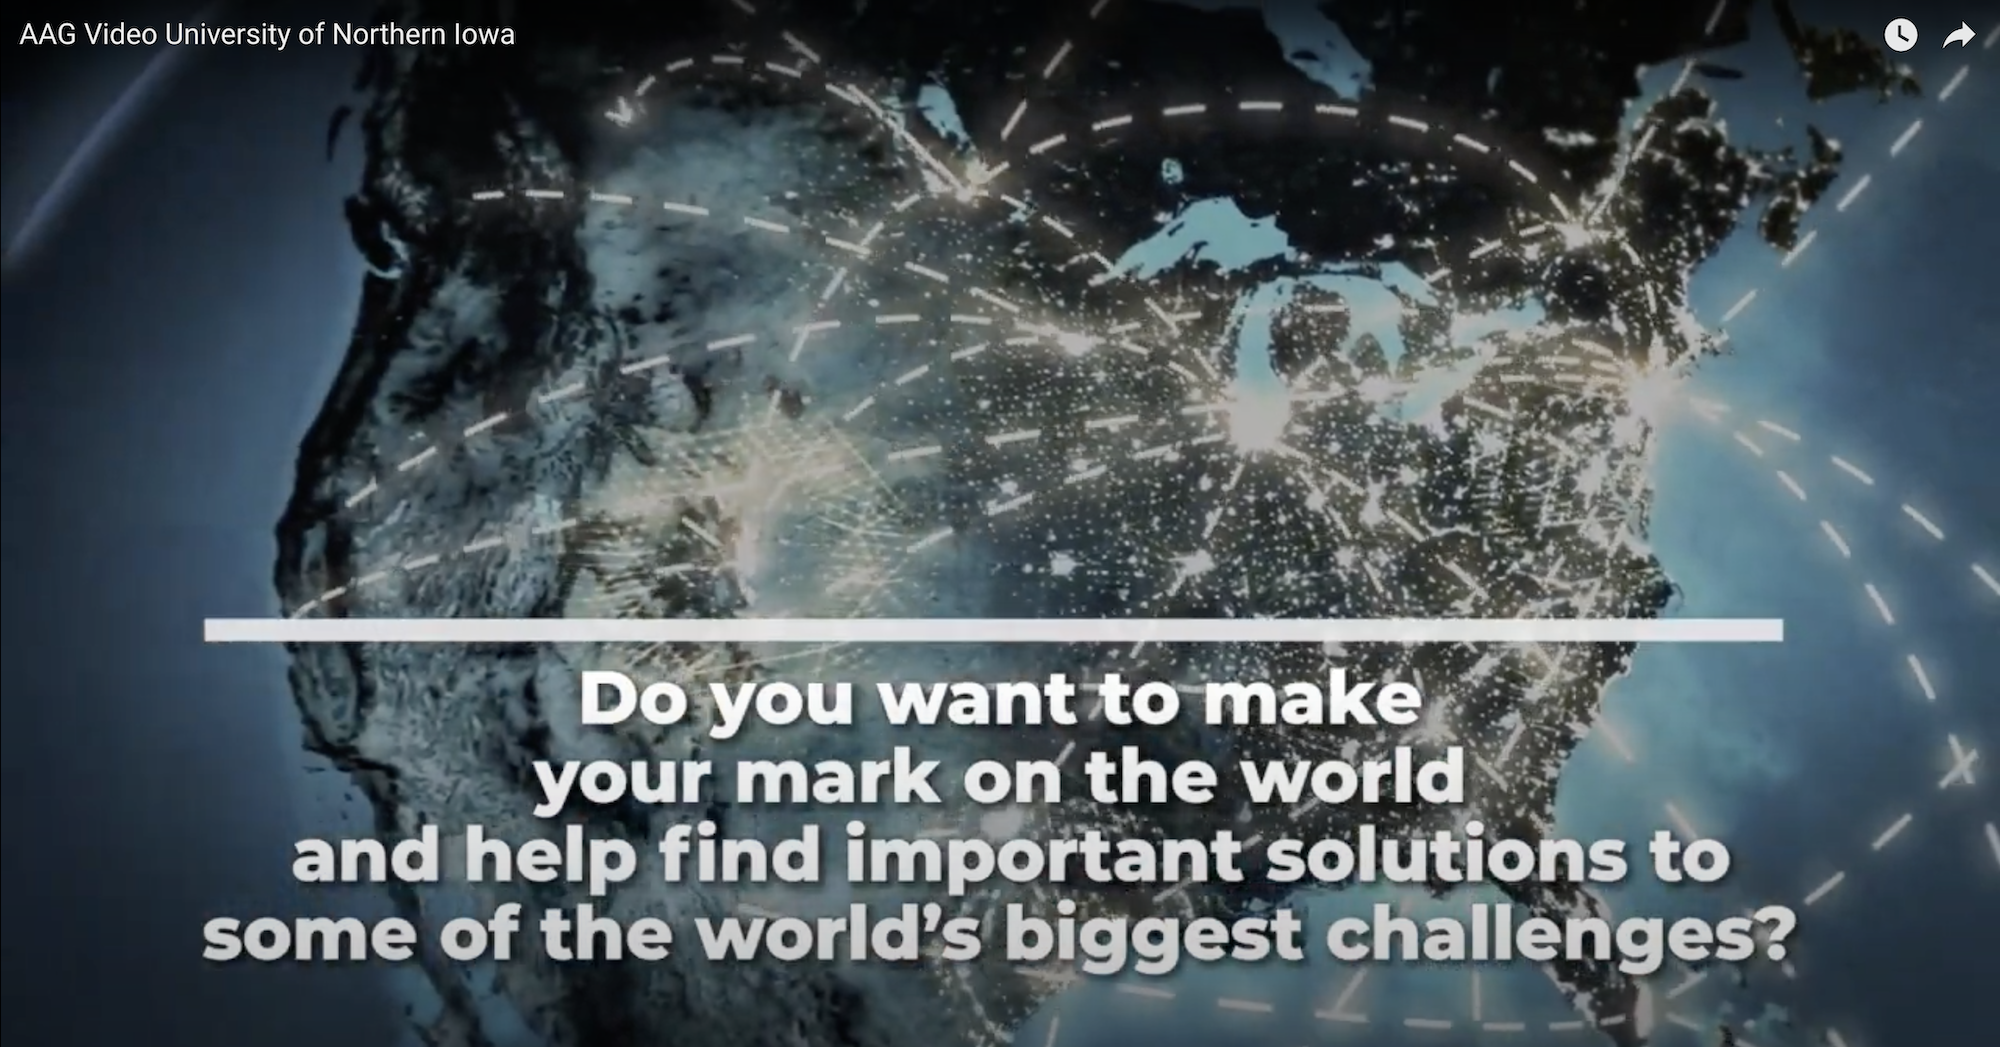 Do you want to make your mark on the world?